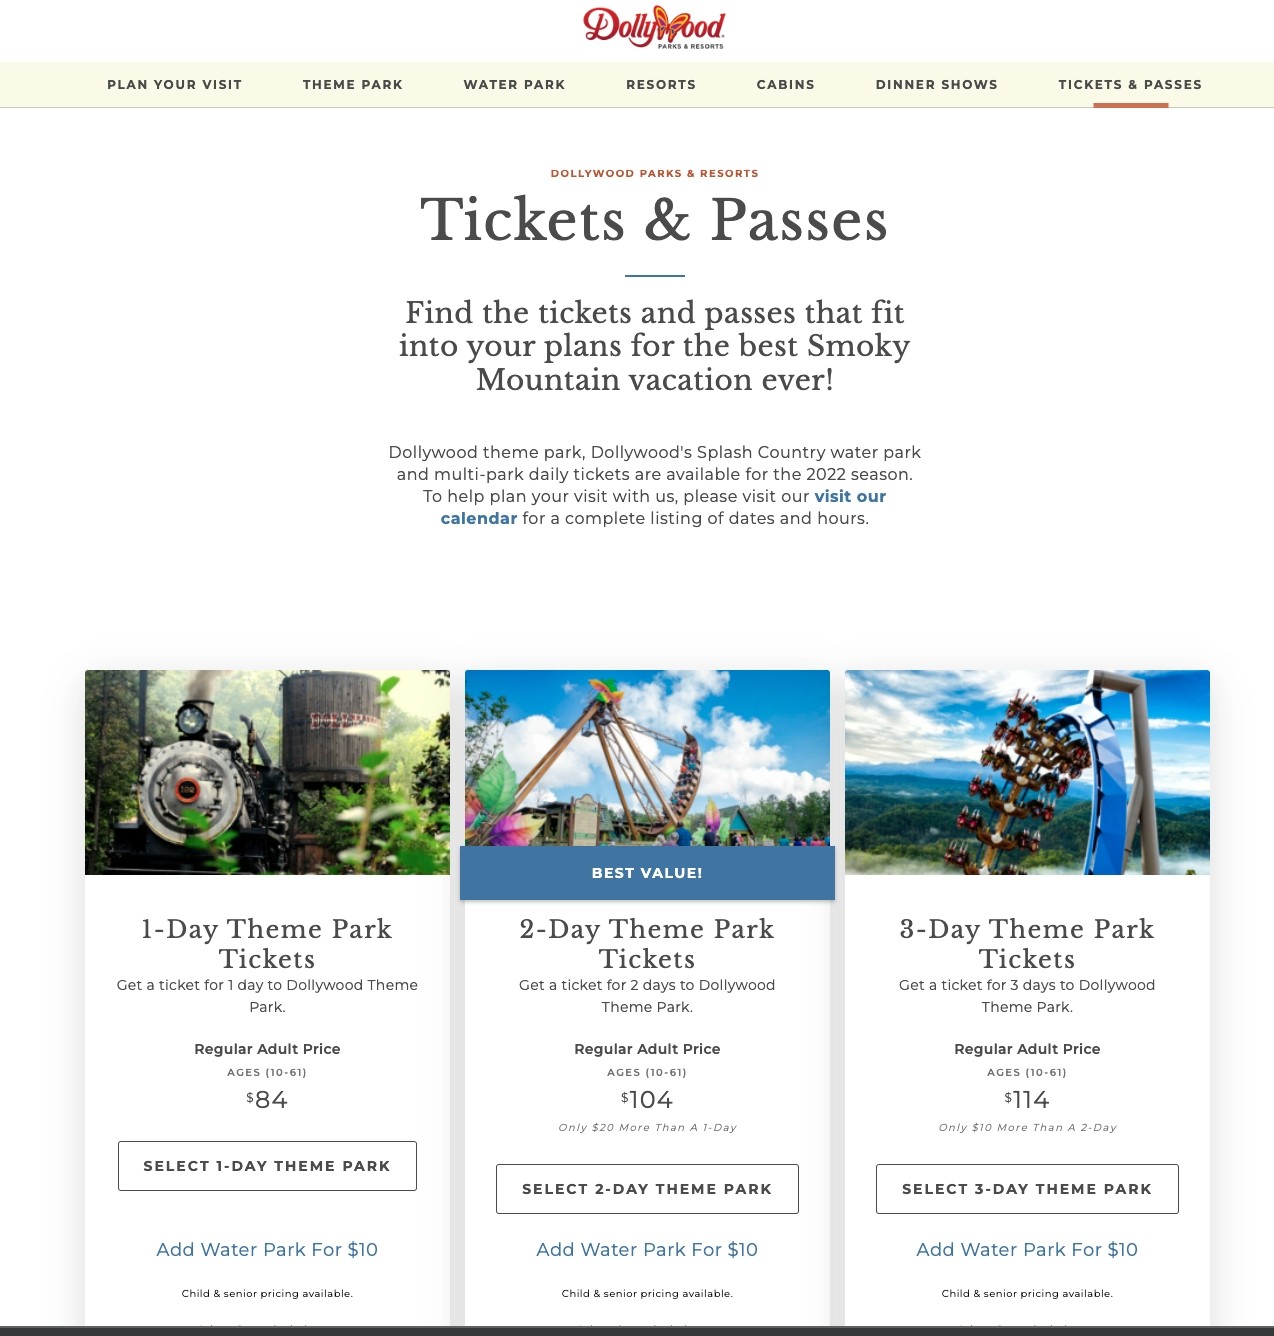 Dollywood tickets and passes landing page